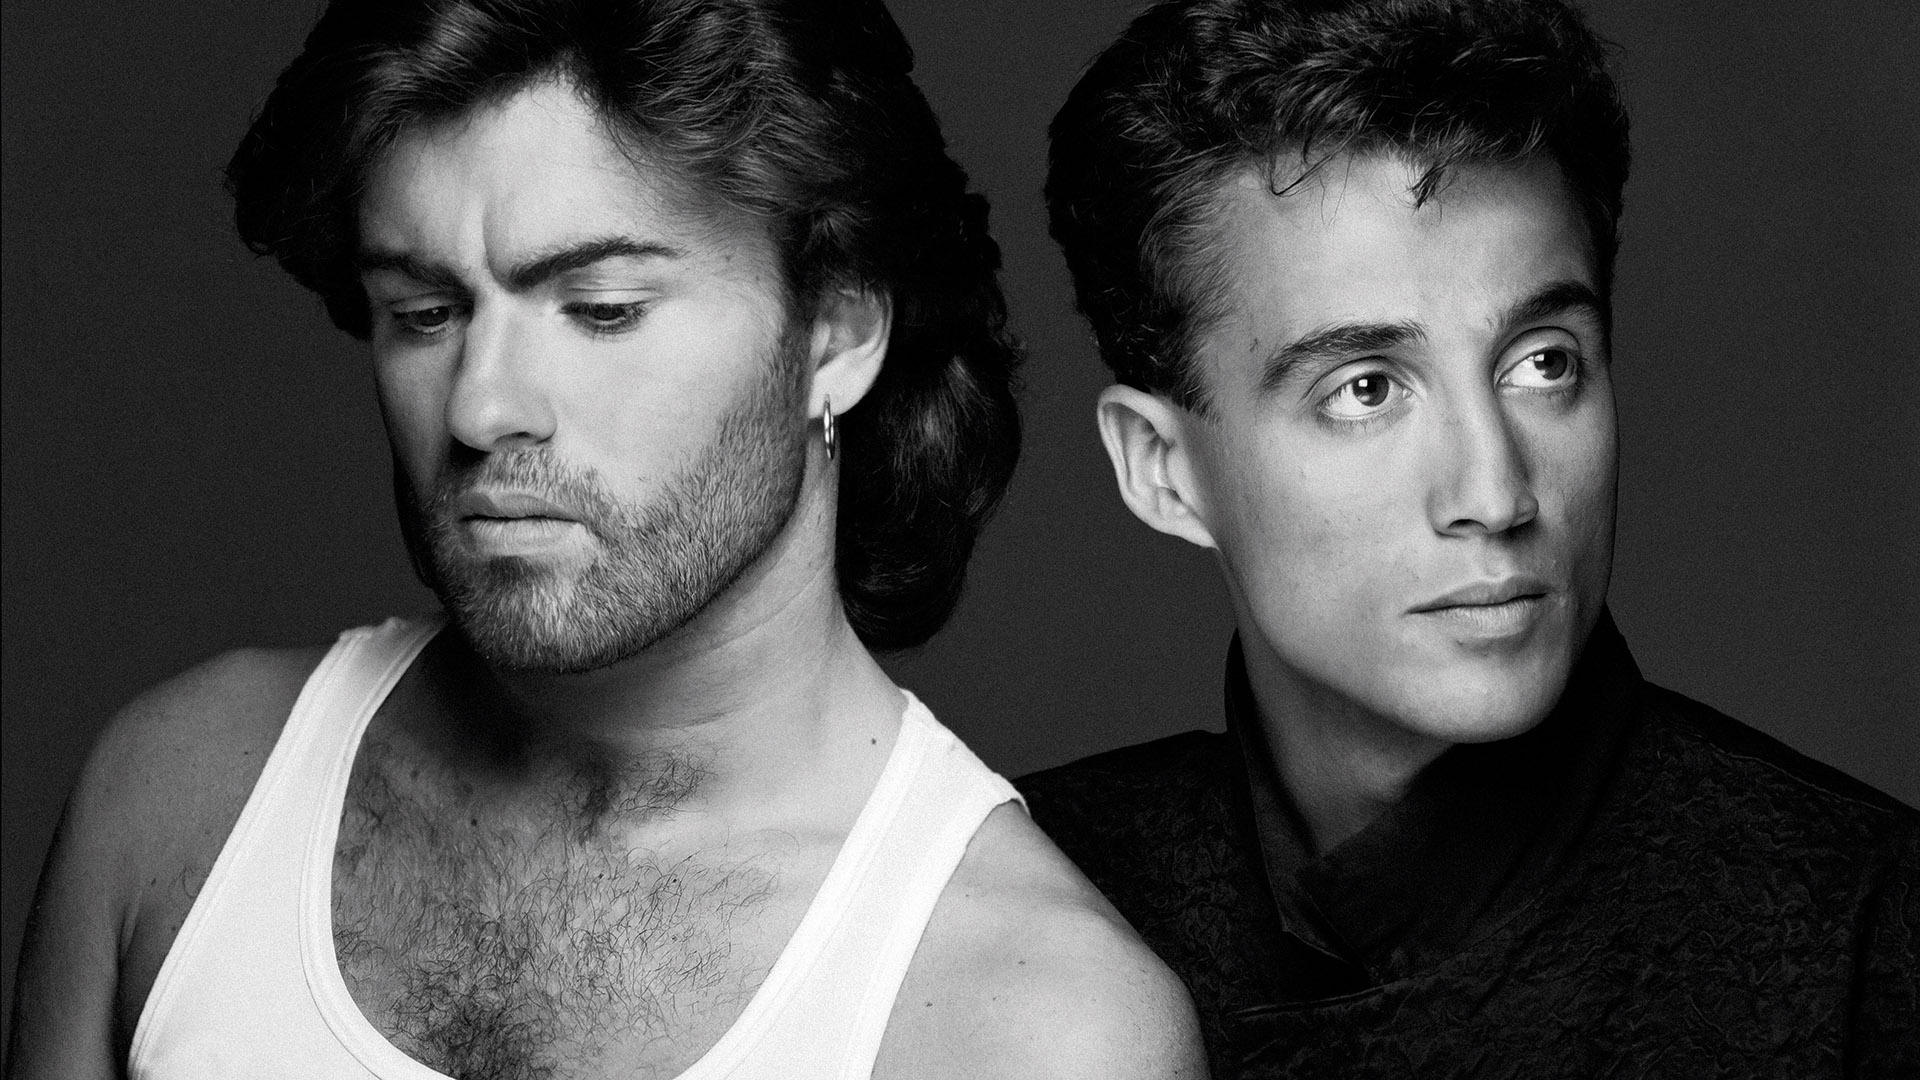 Wham! in 1986: George Michael and Andrew Ridgeley